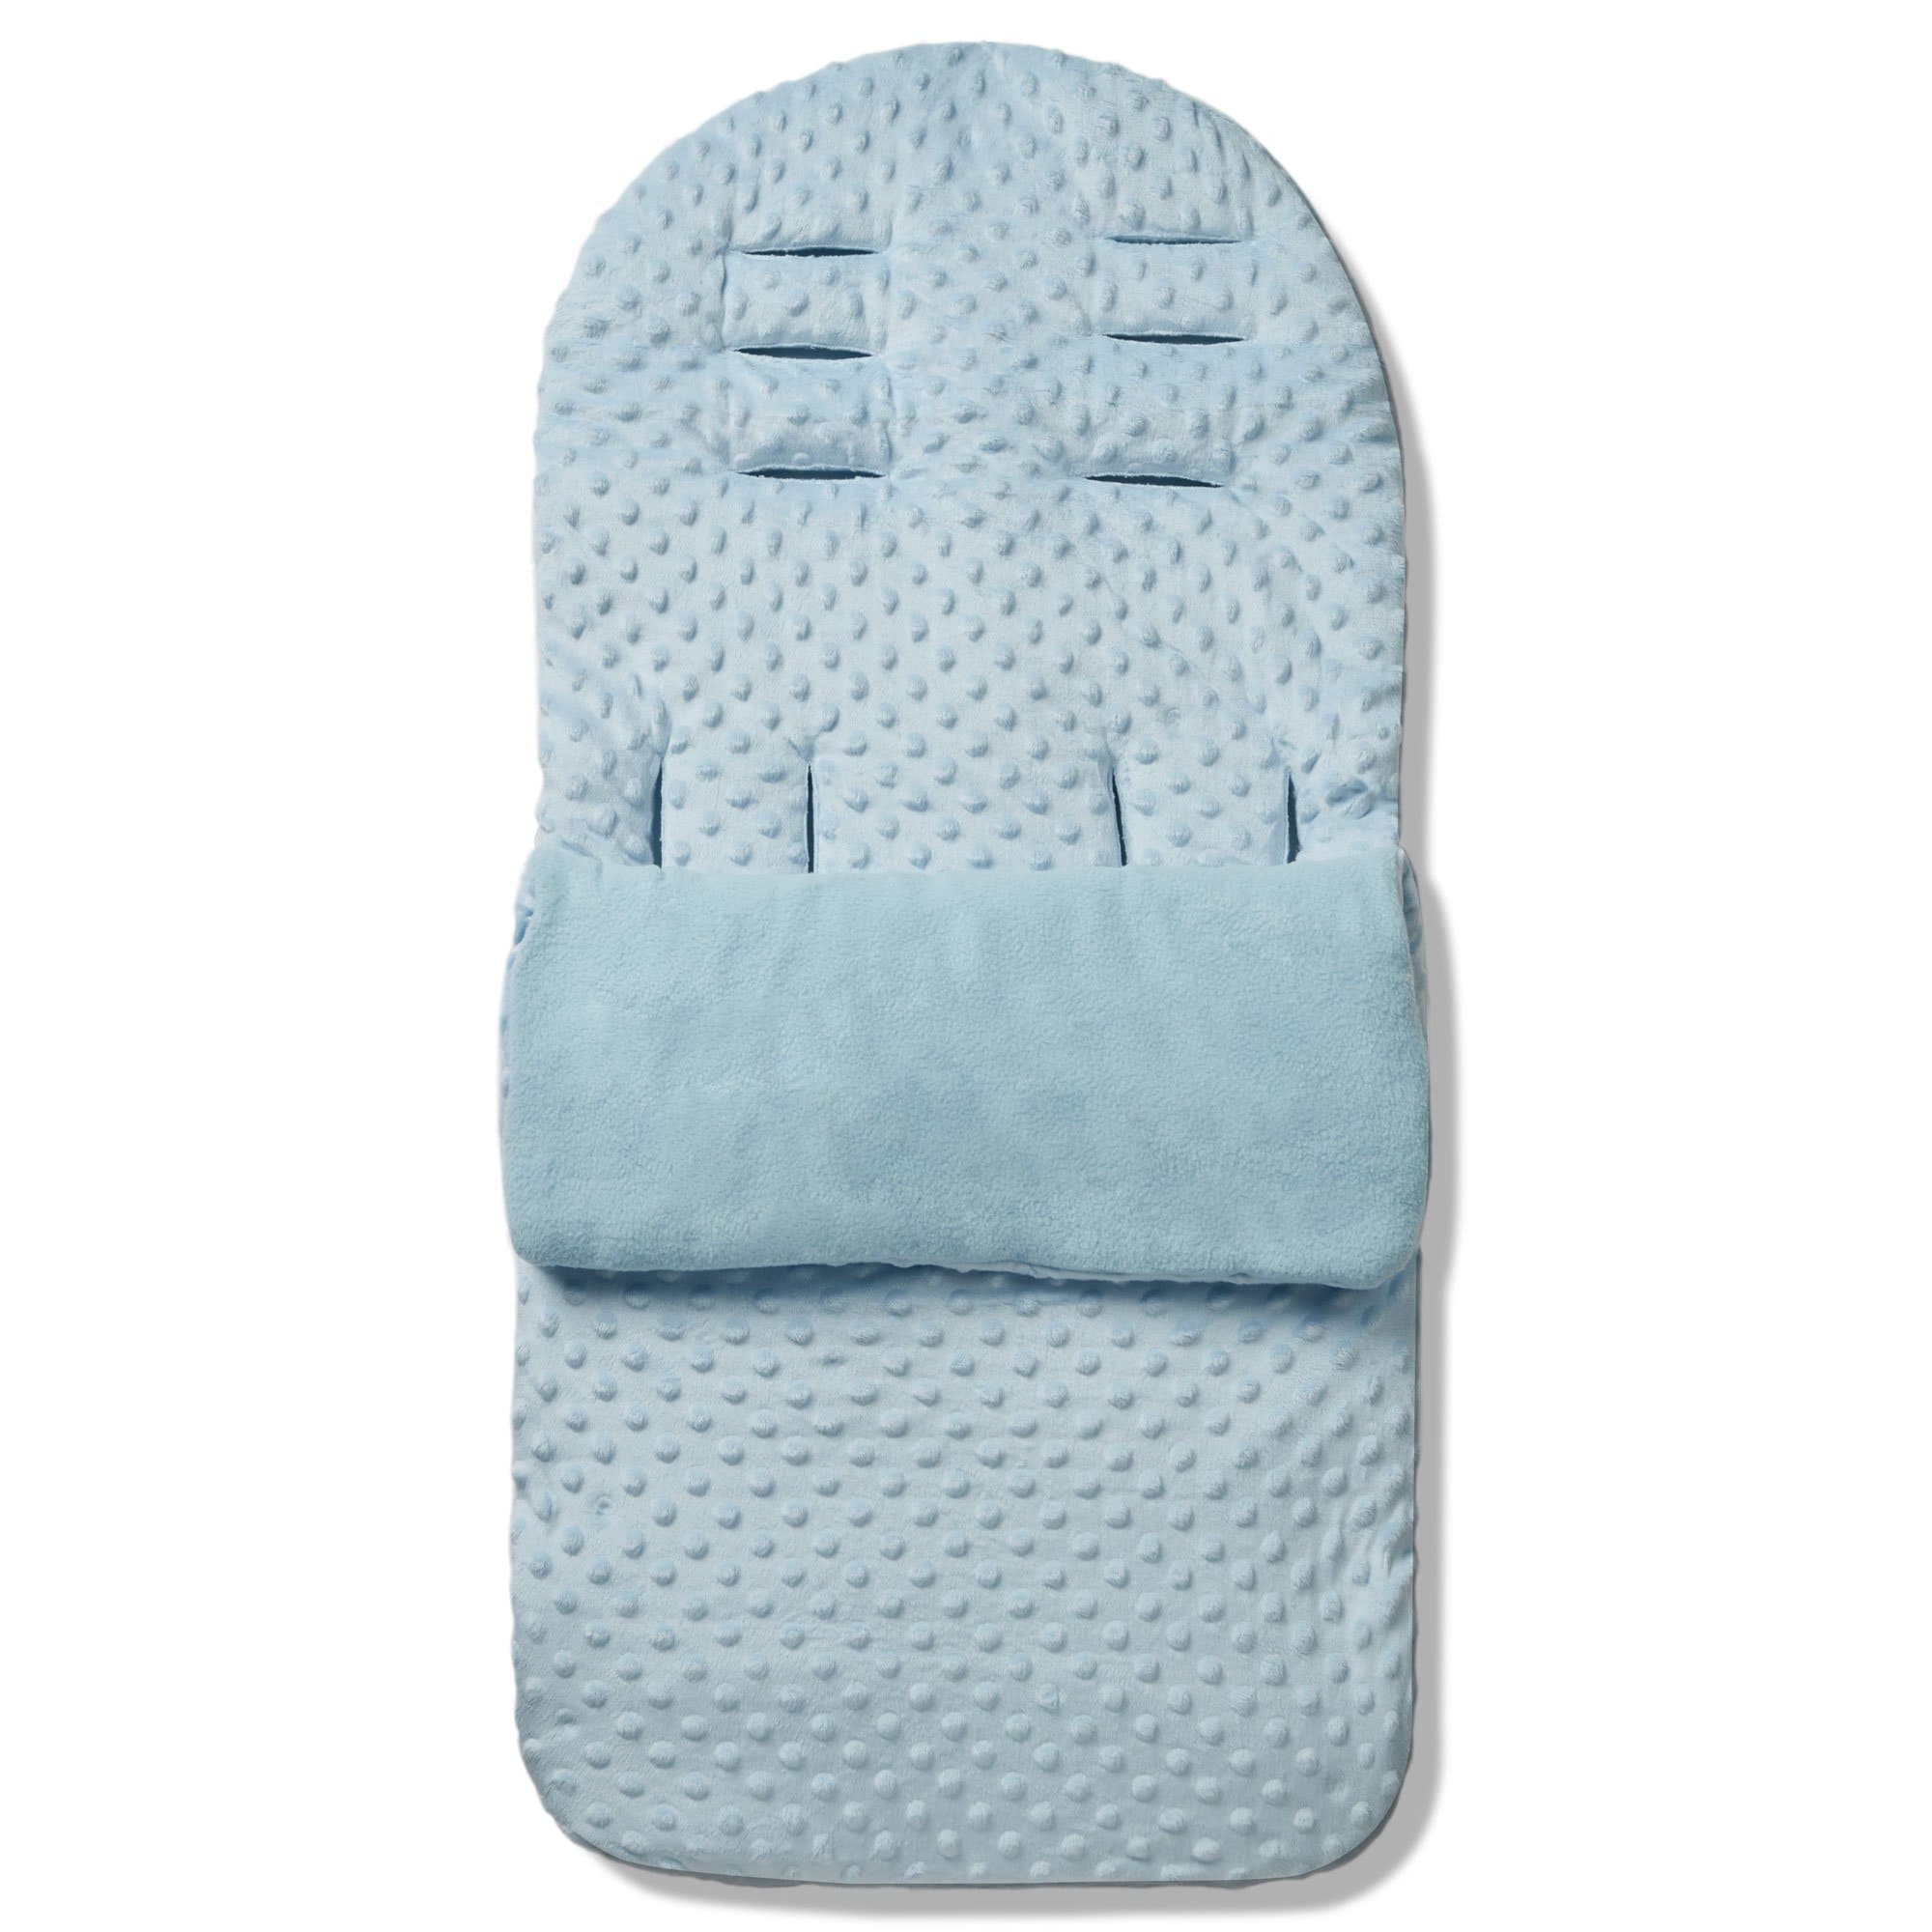 Dimple Footmuff / Cosy Toes Compatible with Norton - Blue / Fits All Models | For Your Little One